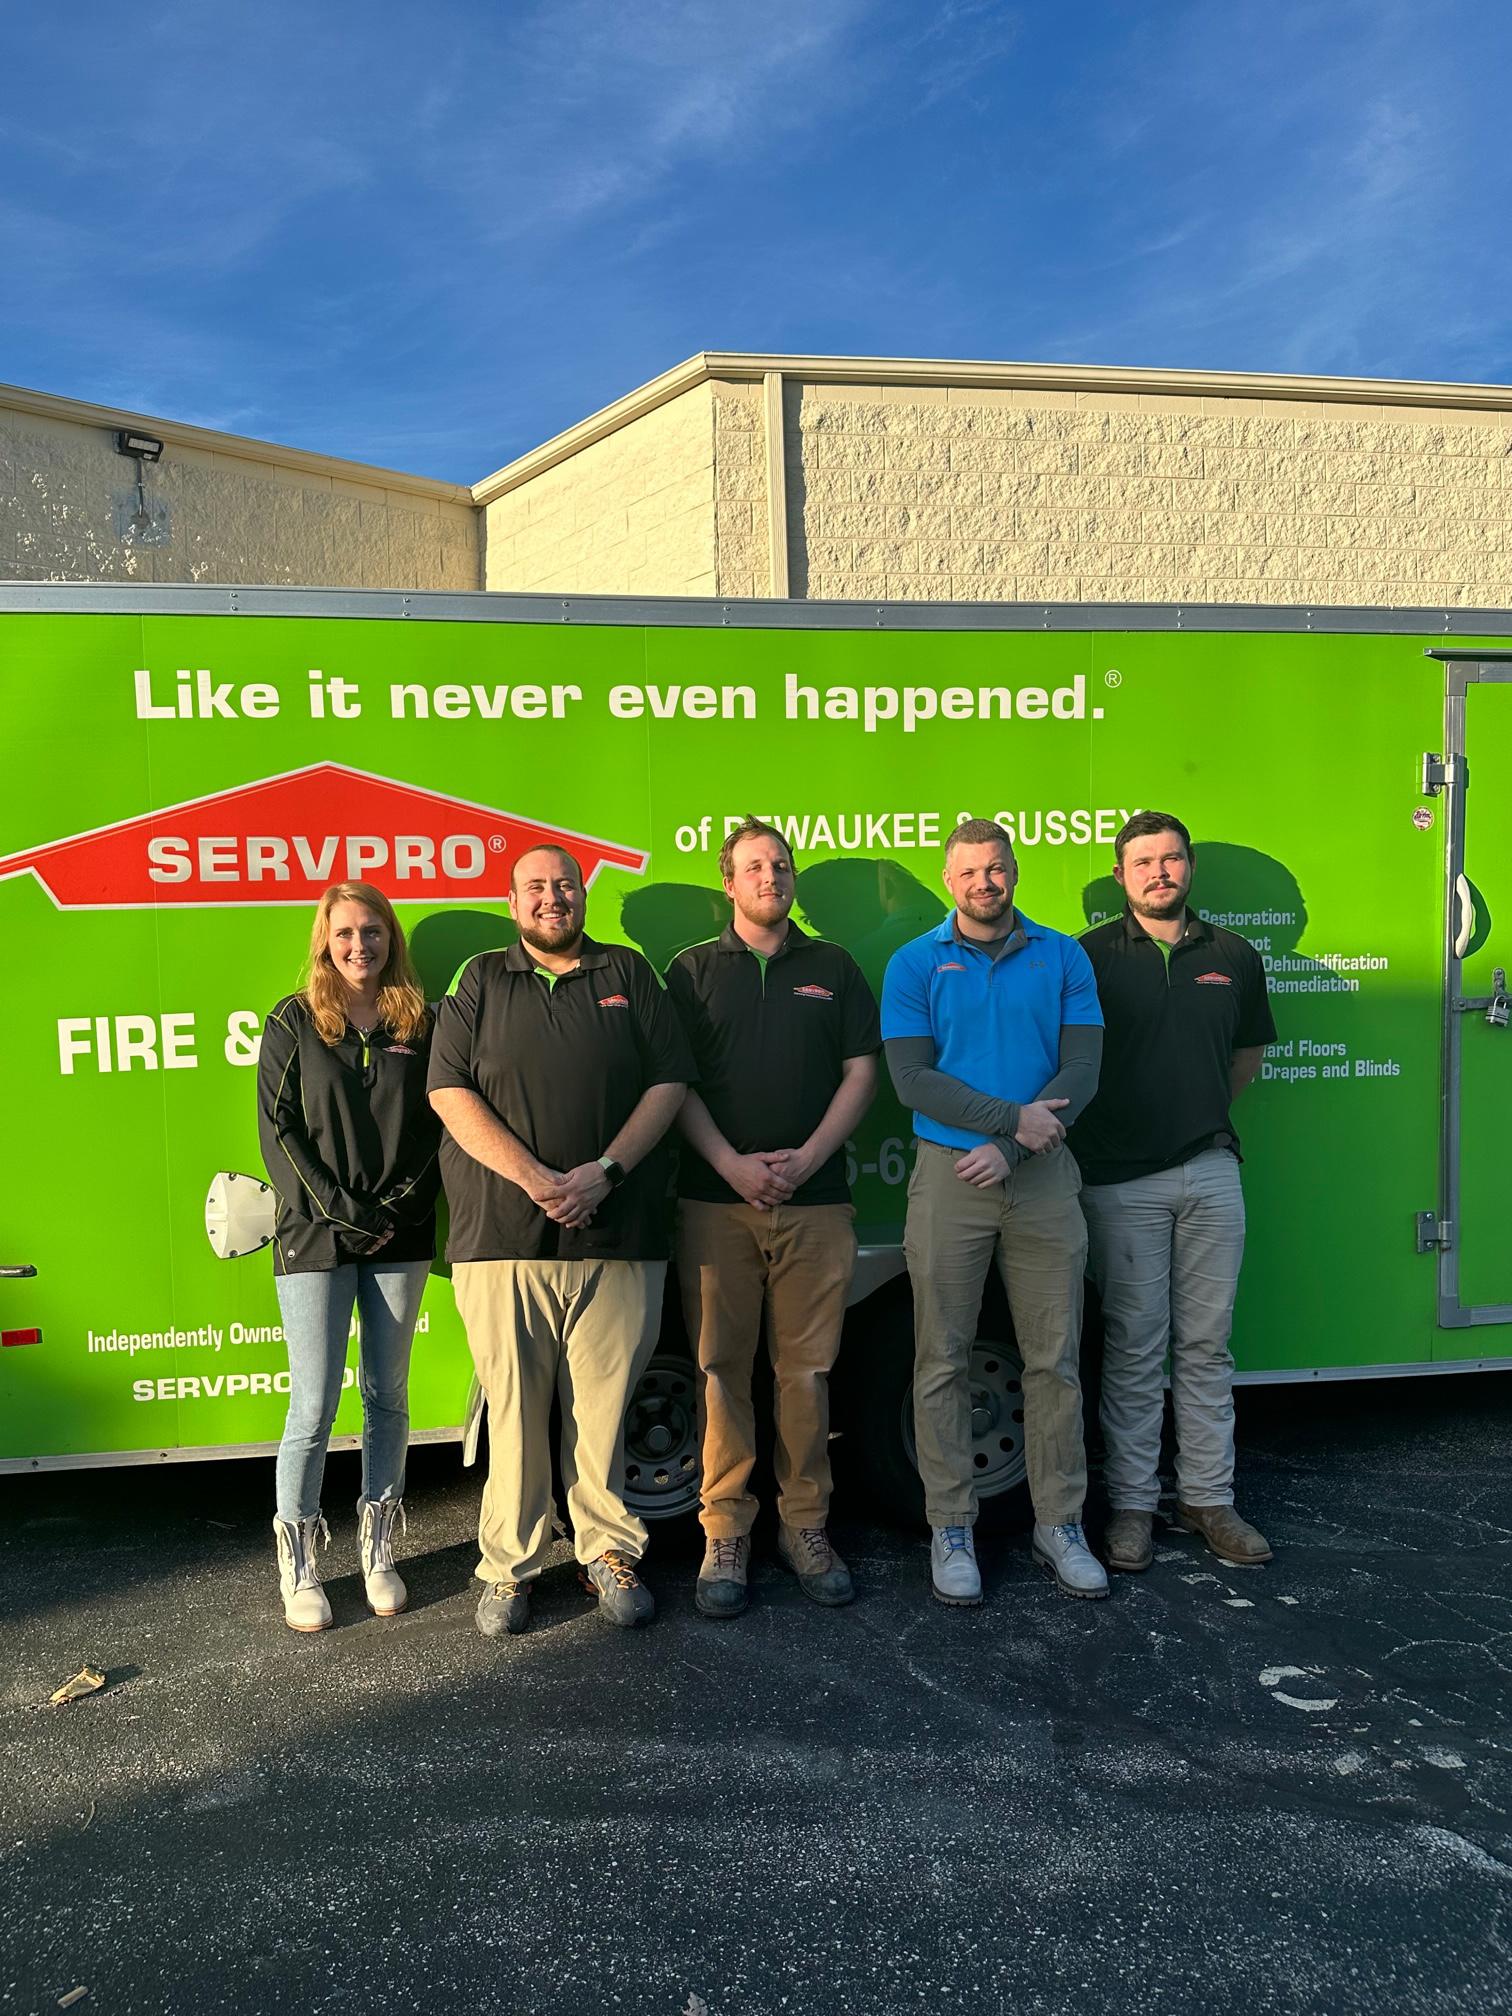 Our team here at Servpro of Pewaukee & Sussex!